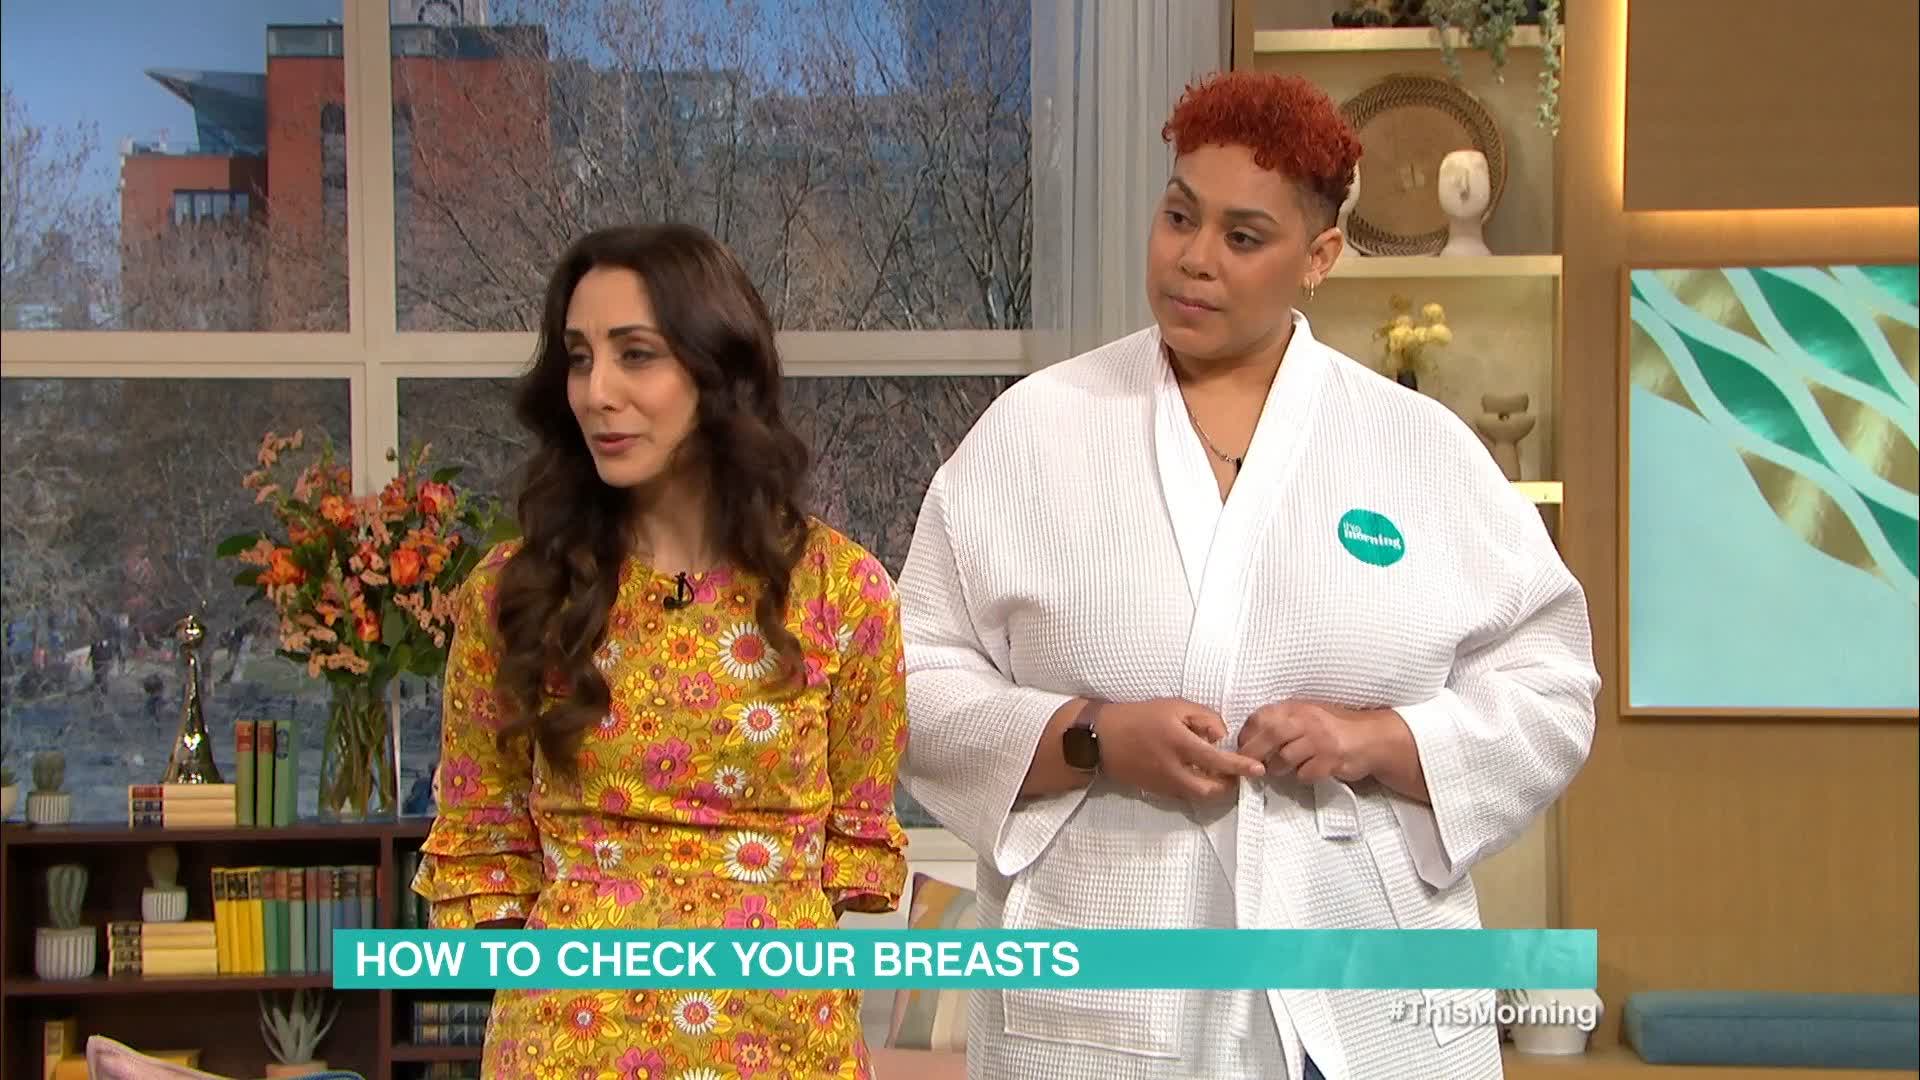 This Morning Made Me Check My Breasts & Saved My Life